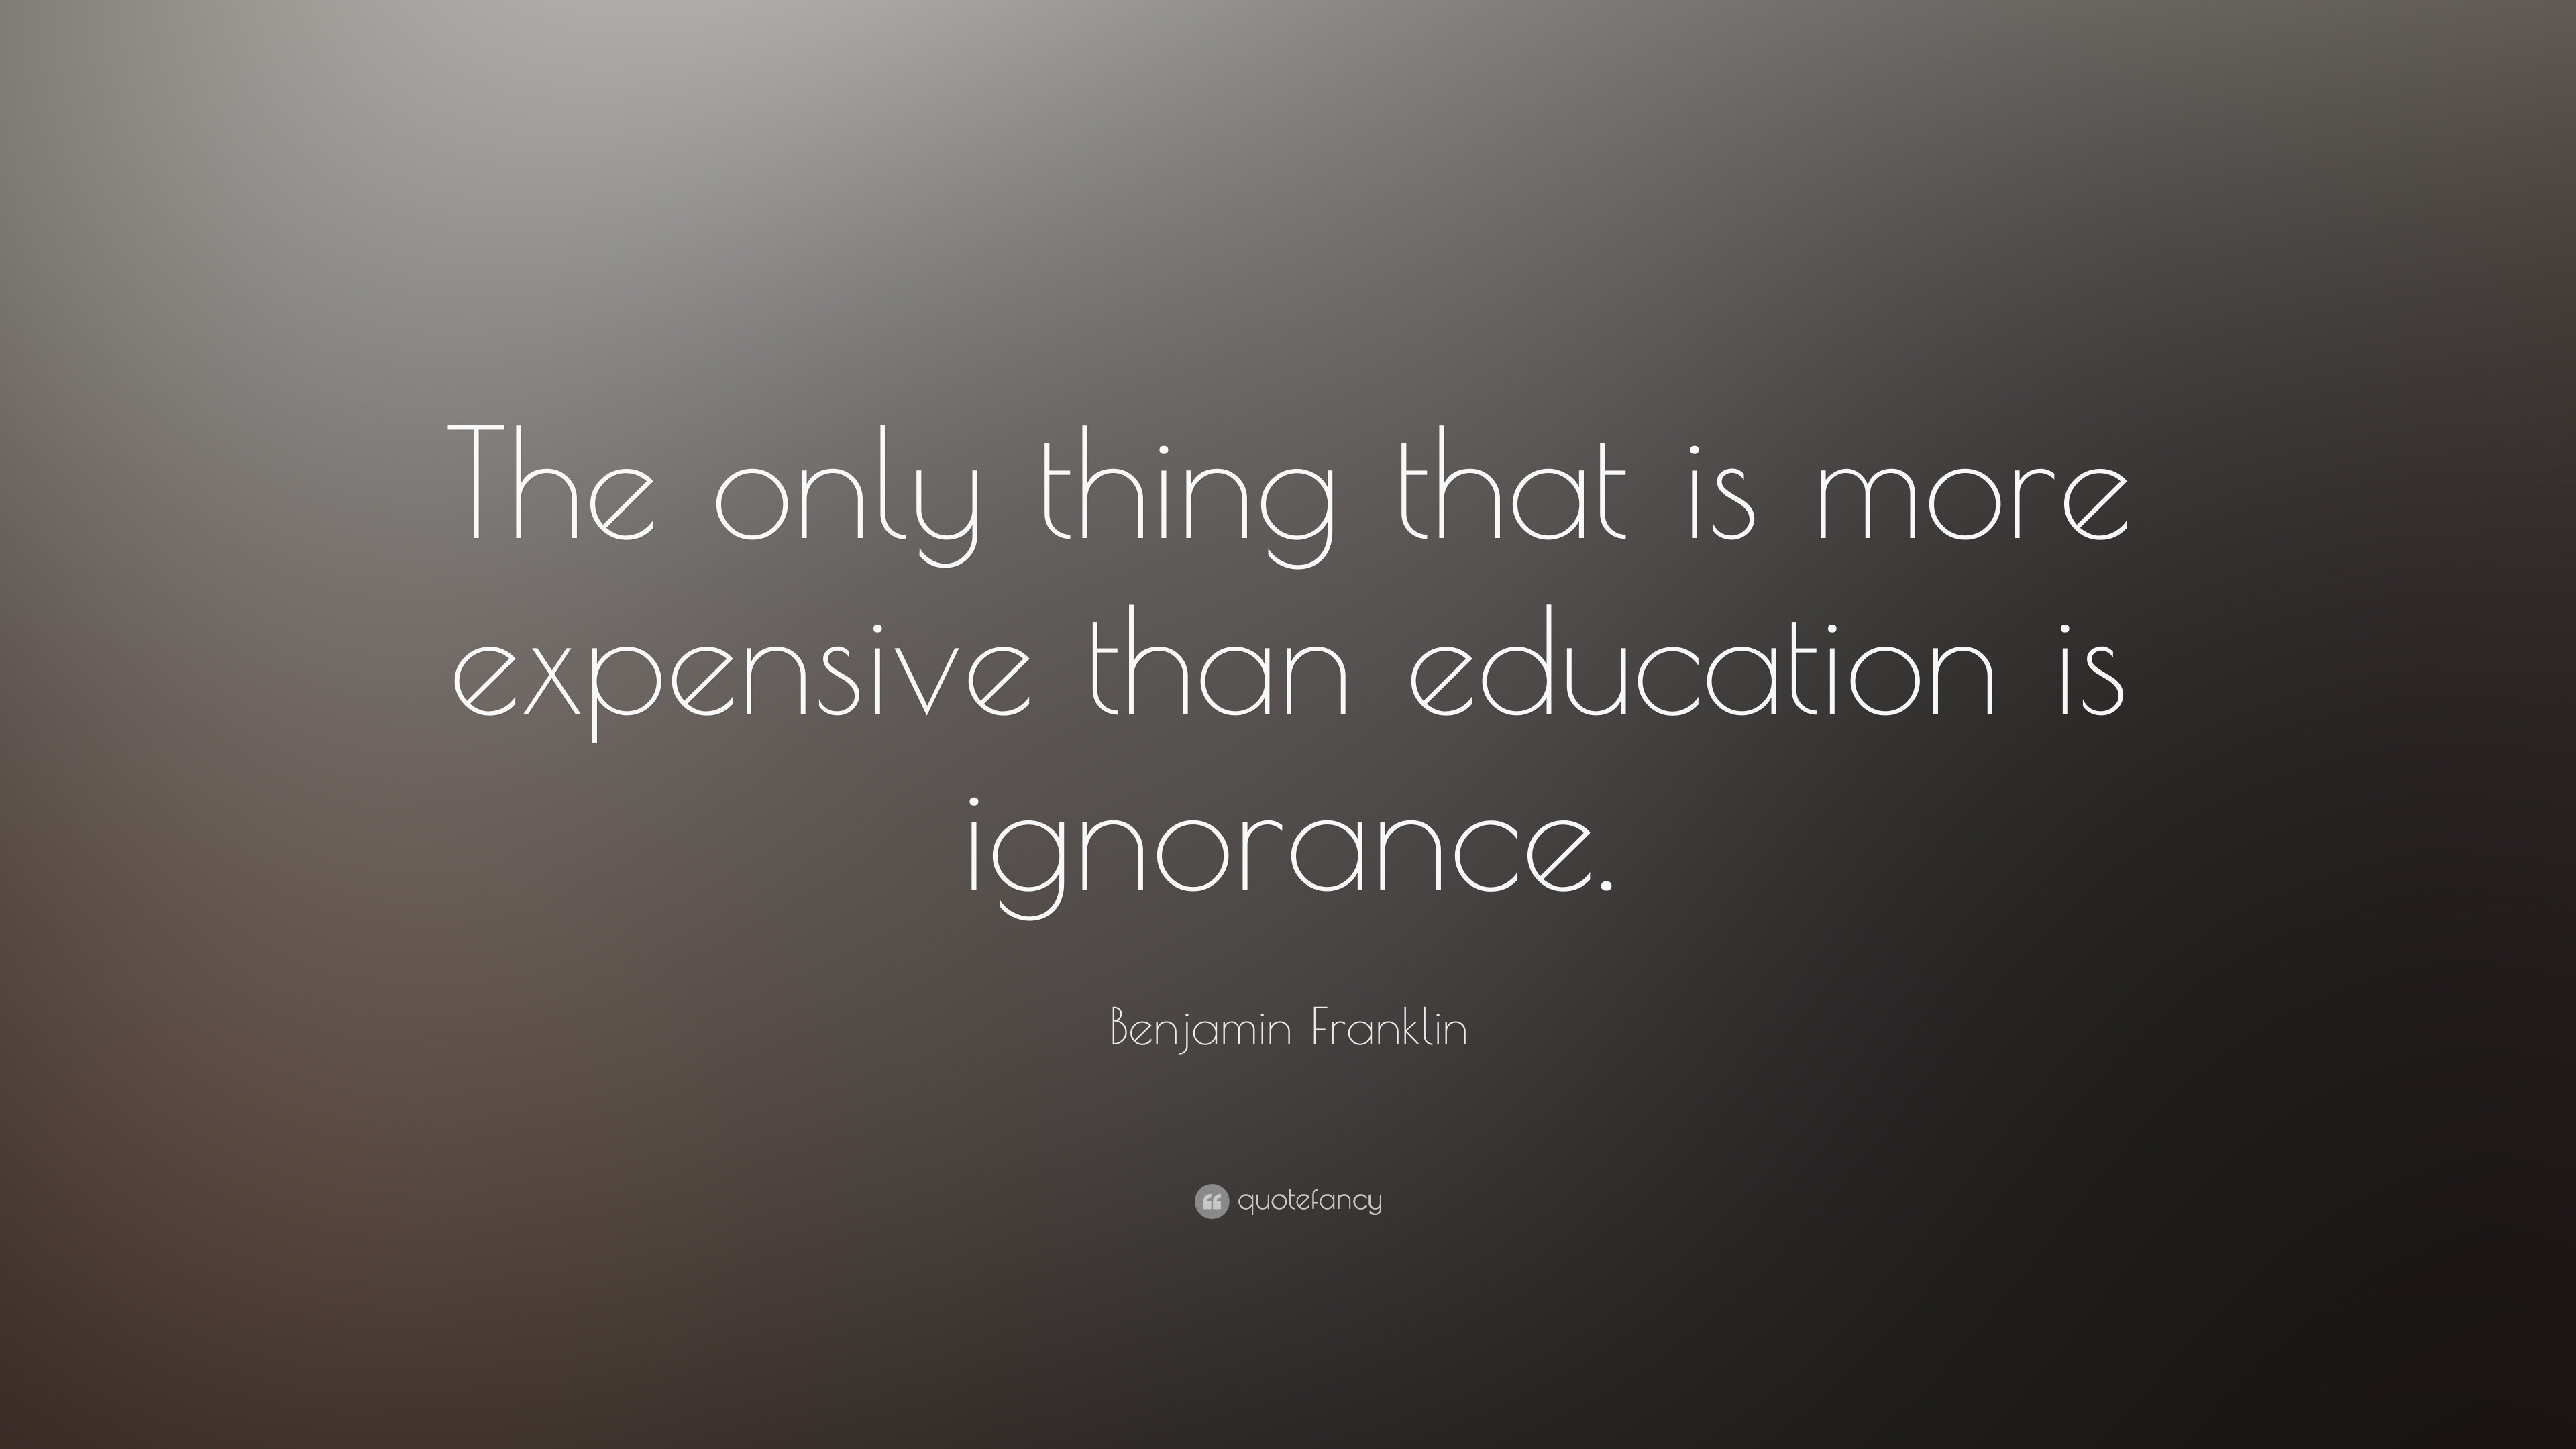 Benjamin Franklin Quote: “The only thing that is more expensive than